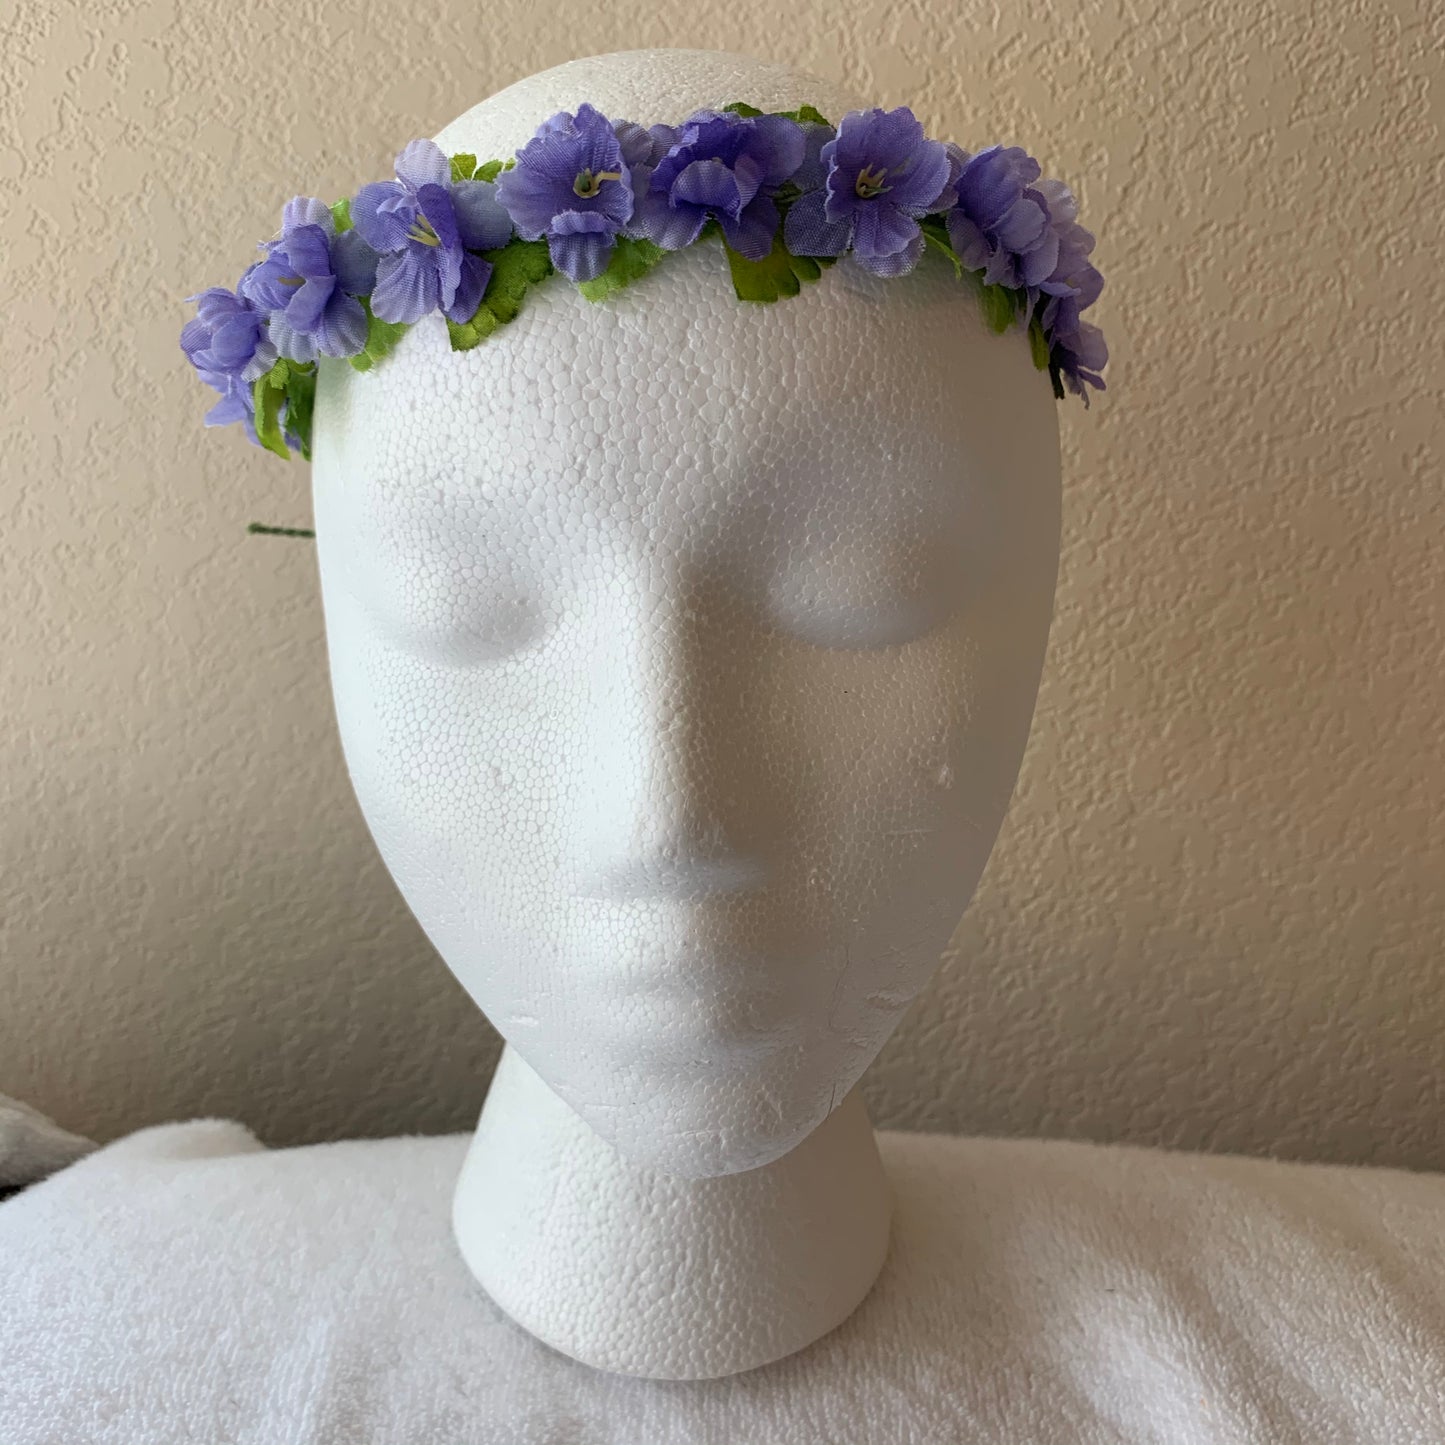 Extra Small Wreath - All Purple Flowers